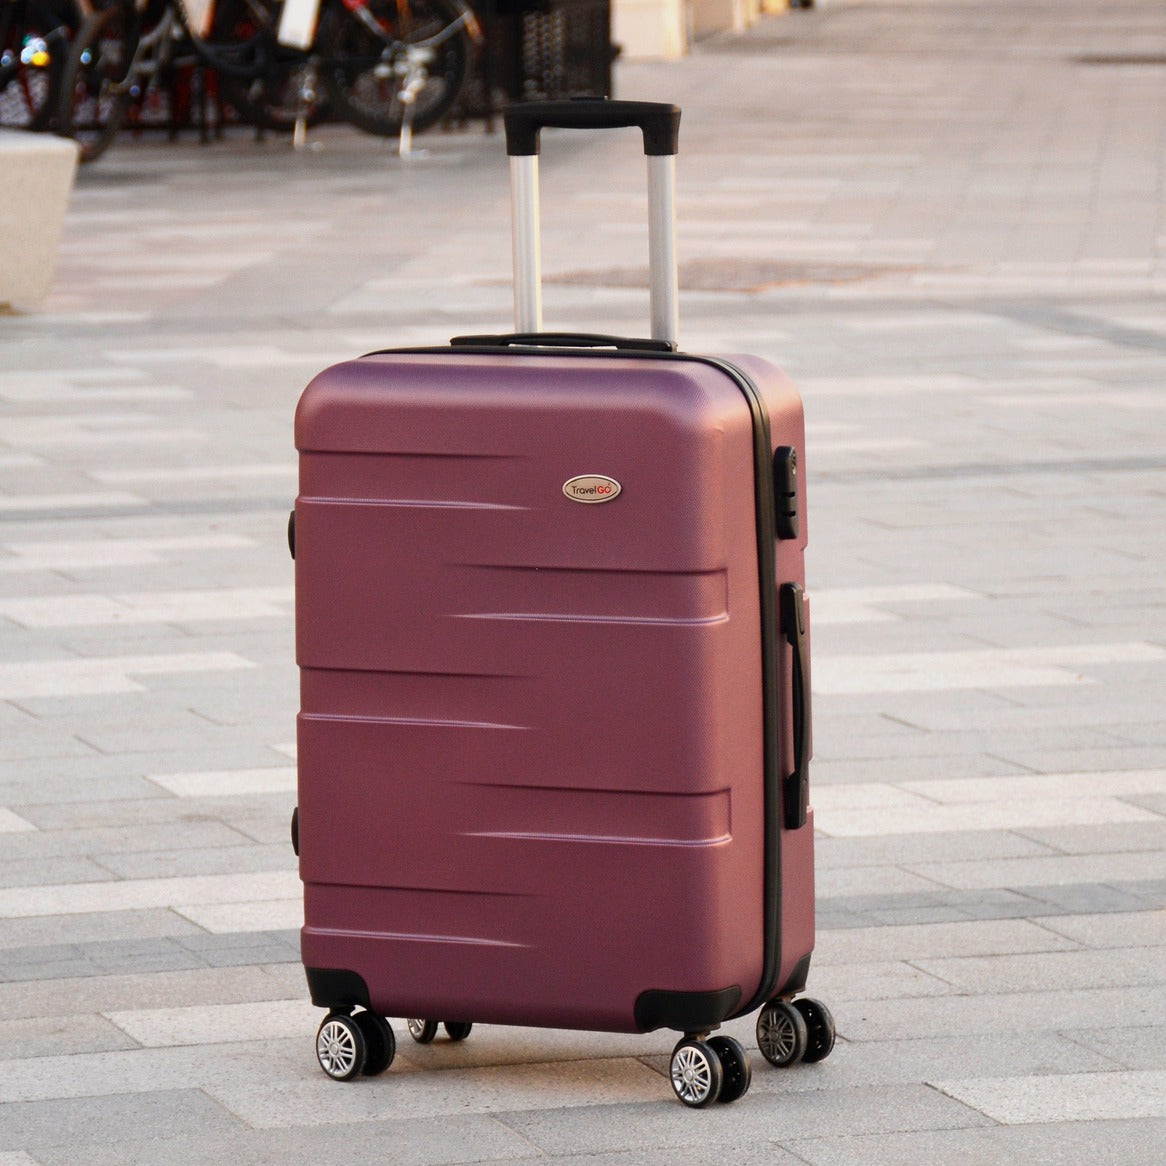 28" Purplish Red Colour JIAN ABS 559 Luggage Lightweight Hard Case Trolley Bag With Spinner Wheel Zaappy.com